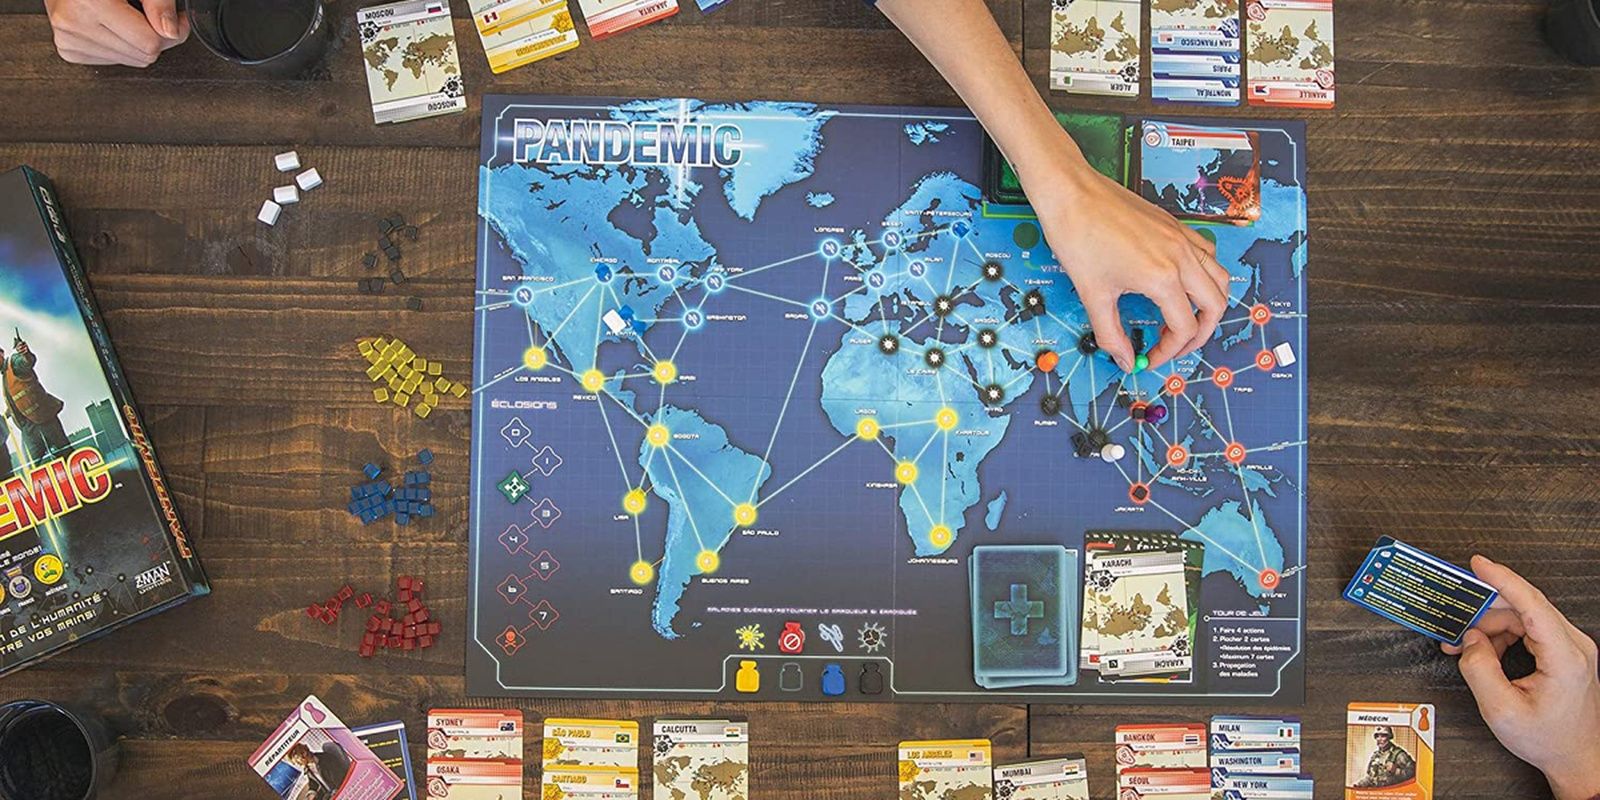 An ongoing game of Pandemic